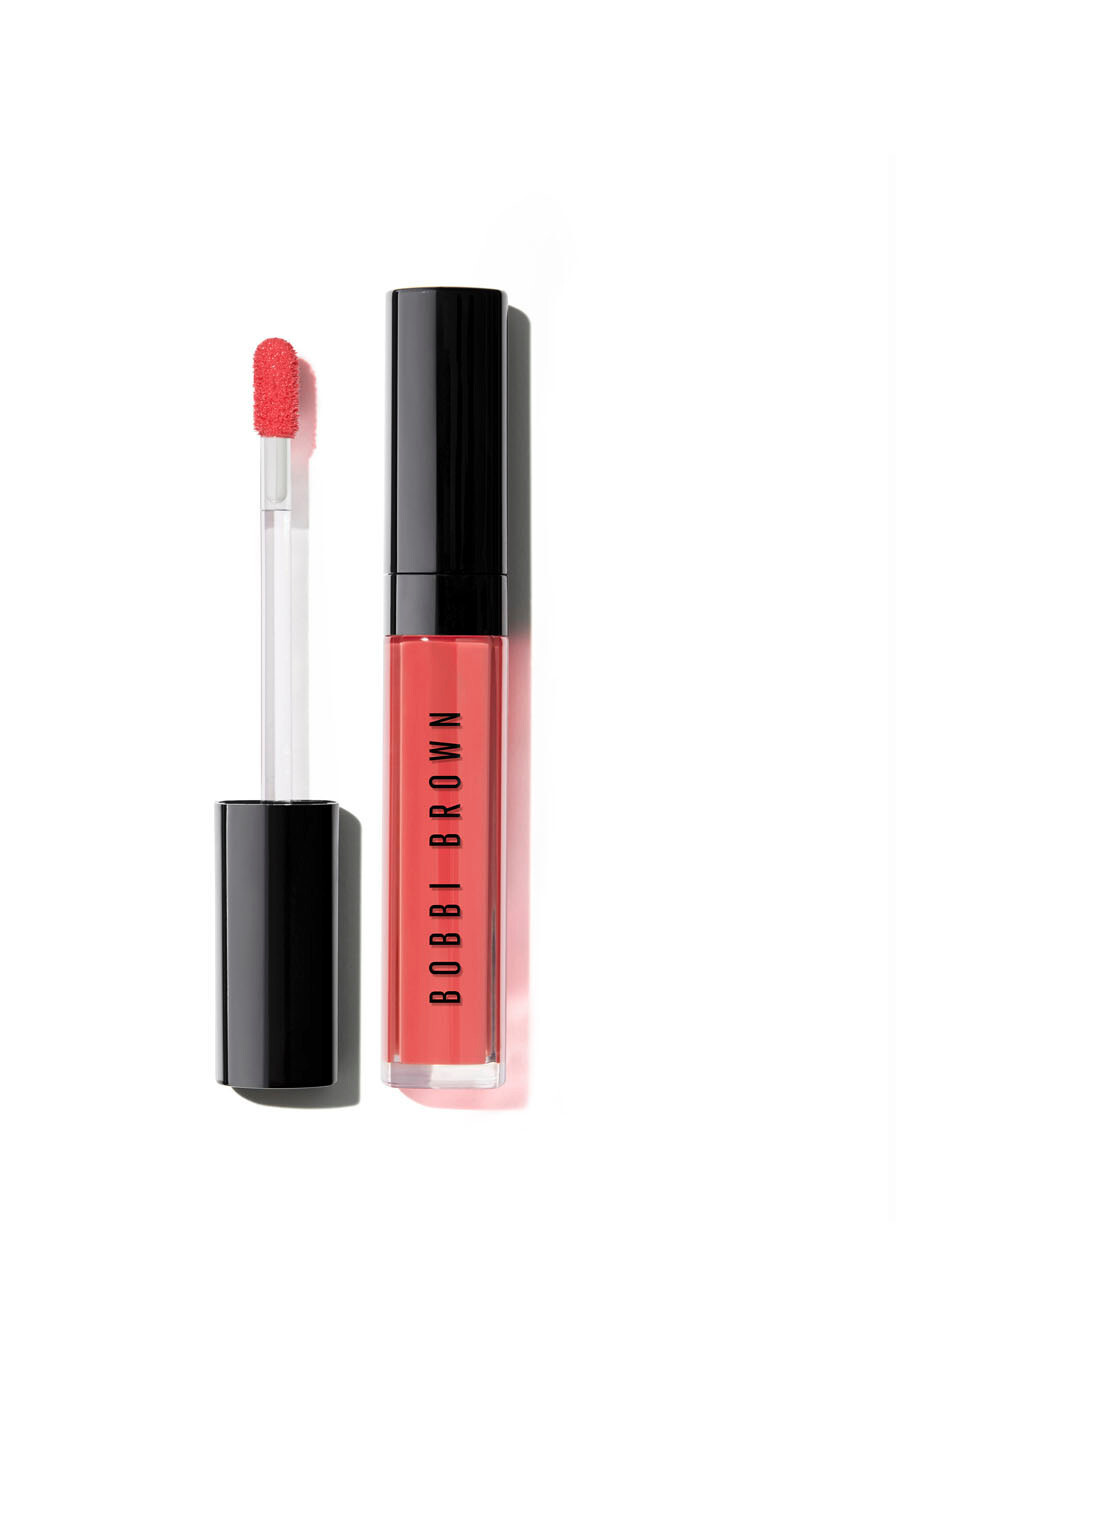 Bobbi Brown Crushed Oil-Infused Gloss - lipgloss